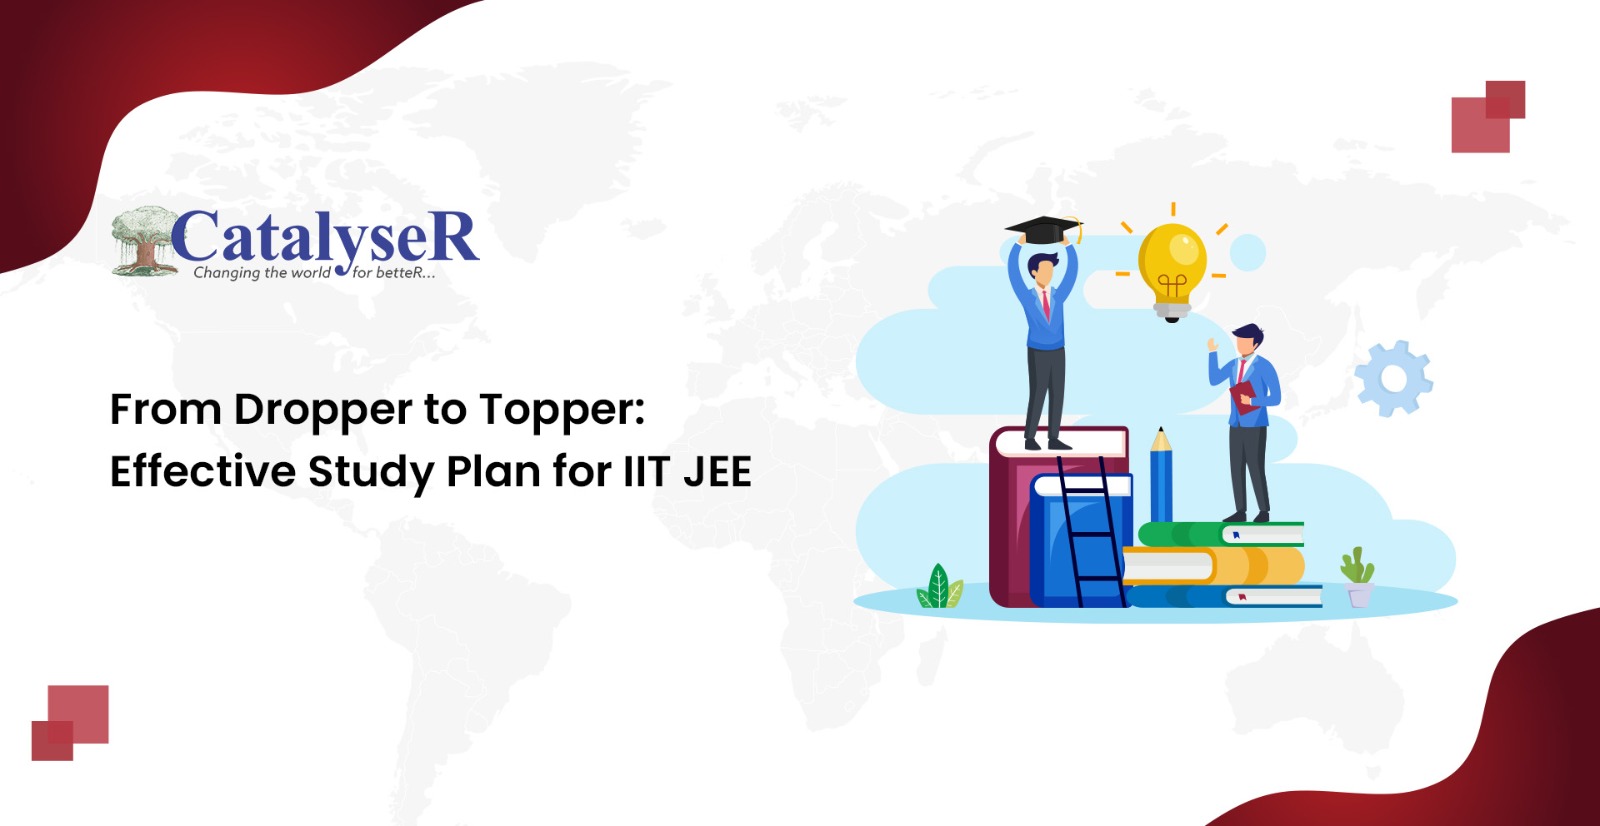 From Dropper to Topper: Effective Study Plan for IIT JEE